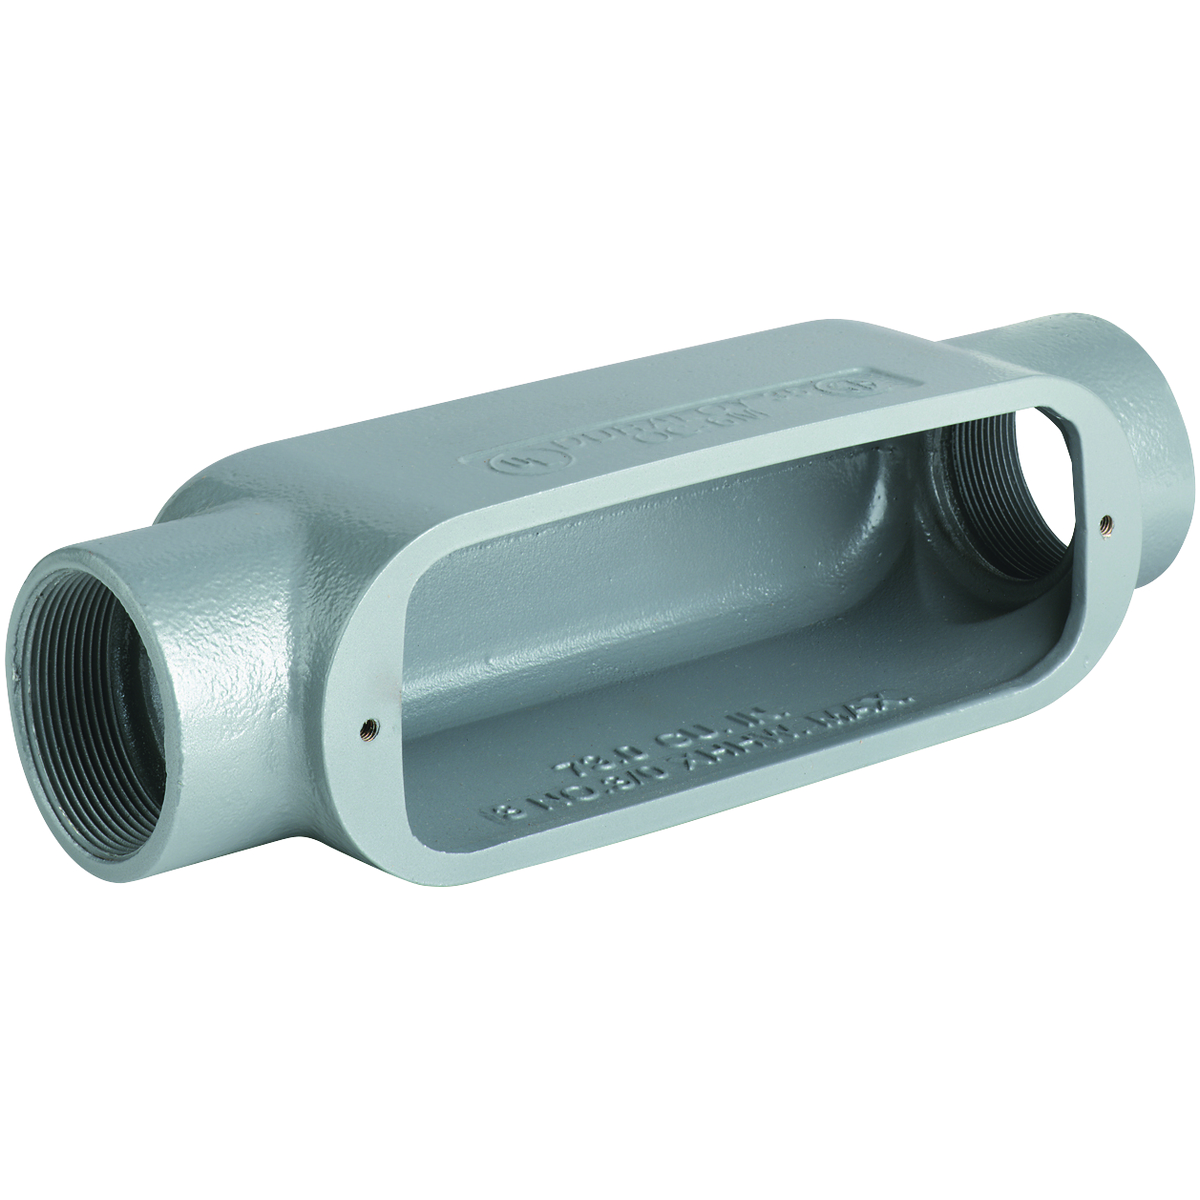 O SERIES/DURALOY 5 SERIES - ALUMINUM CONDUIT BODY - C TYPE - HUB SIZE 2INCH - VOLUME 70.0 CUBIC INCHES